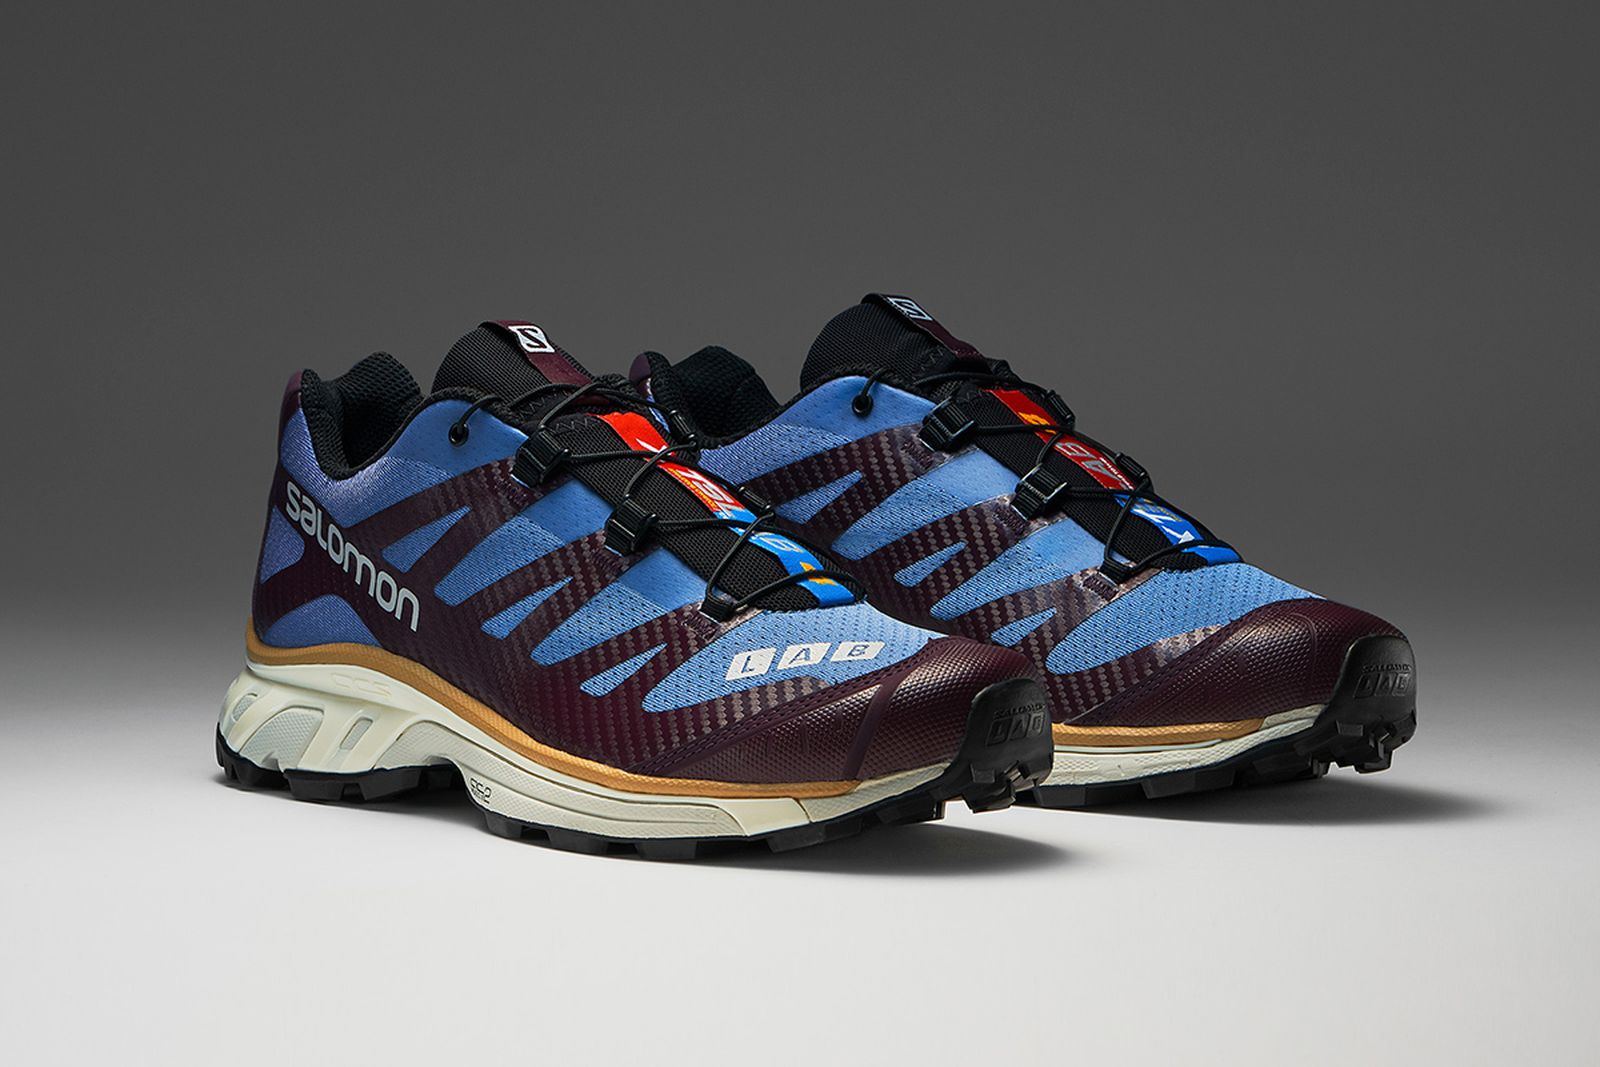 Salomon FW20 sneaker collection product shot